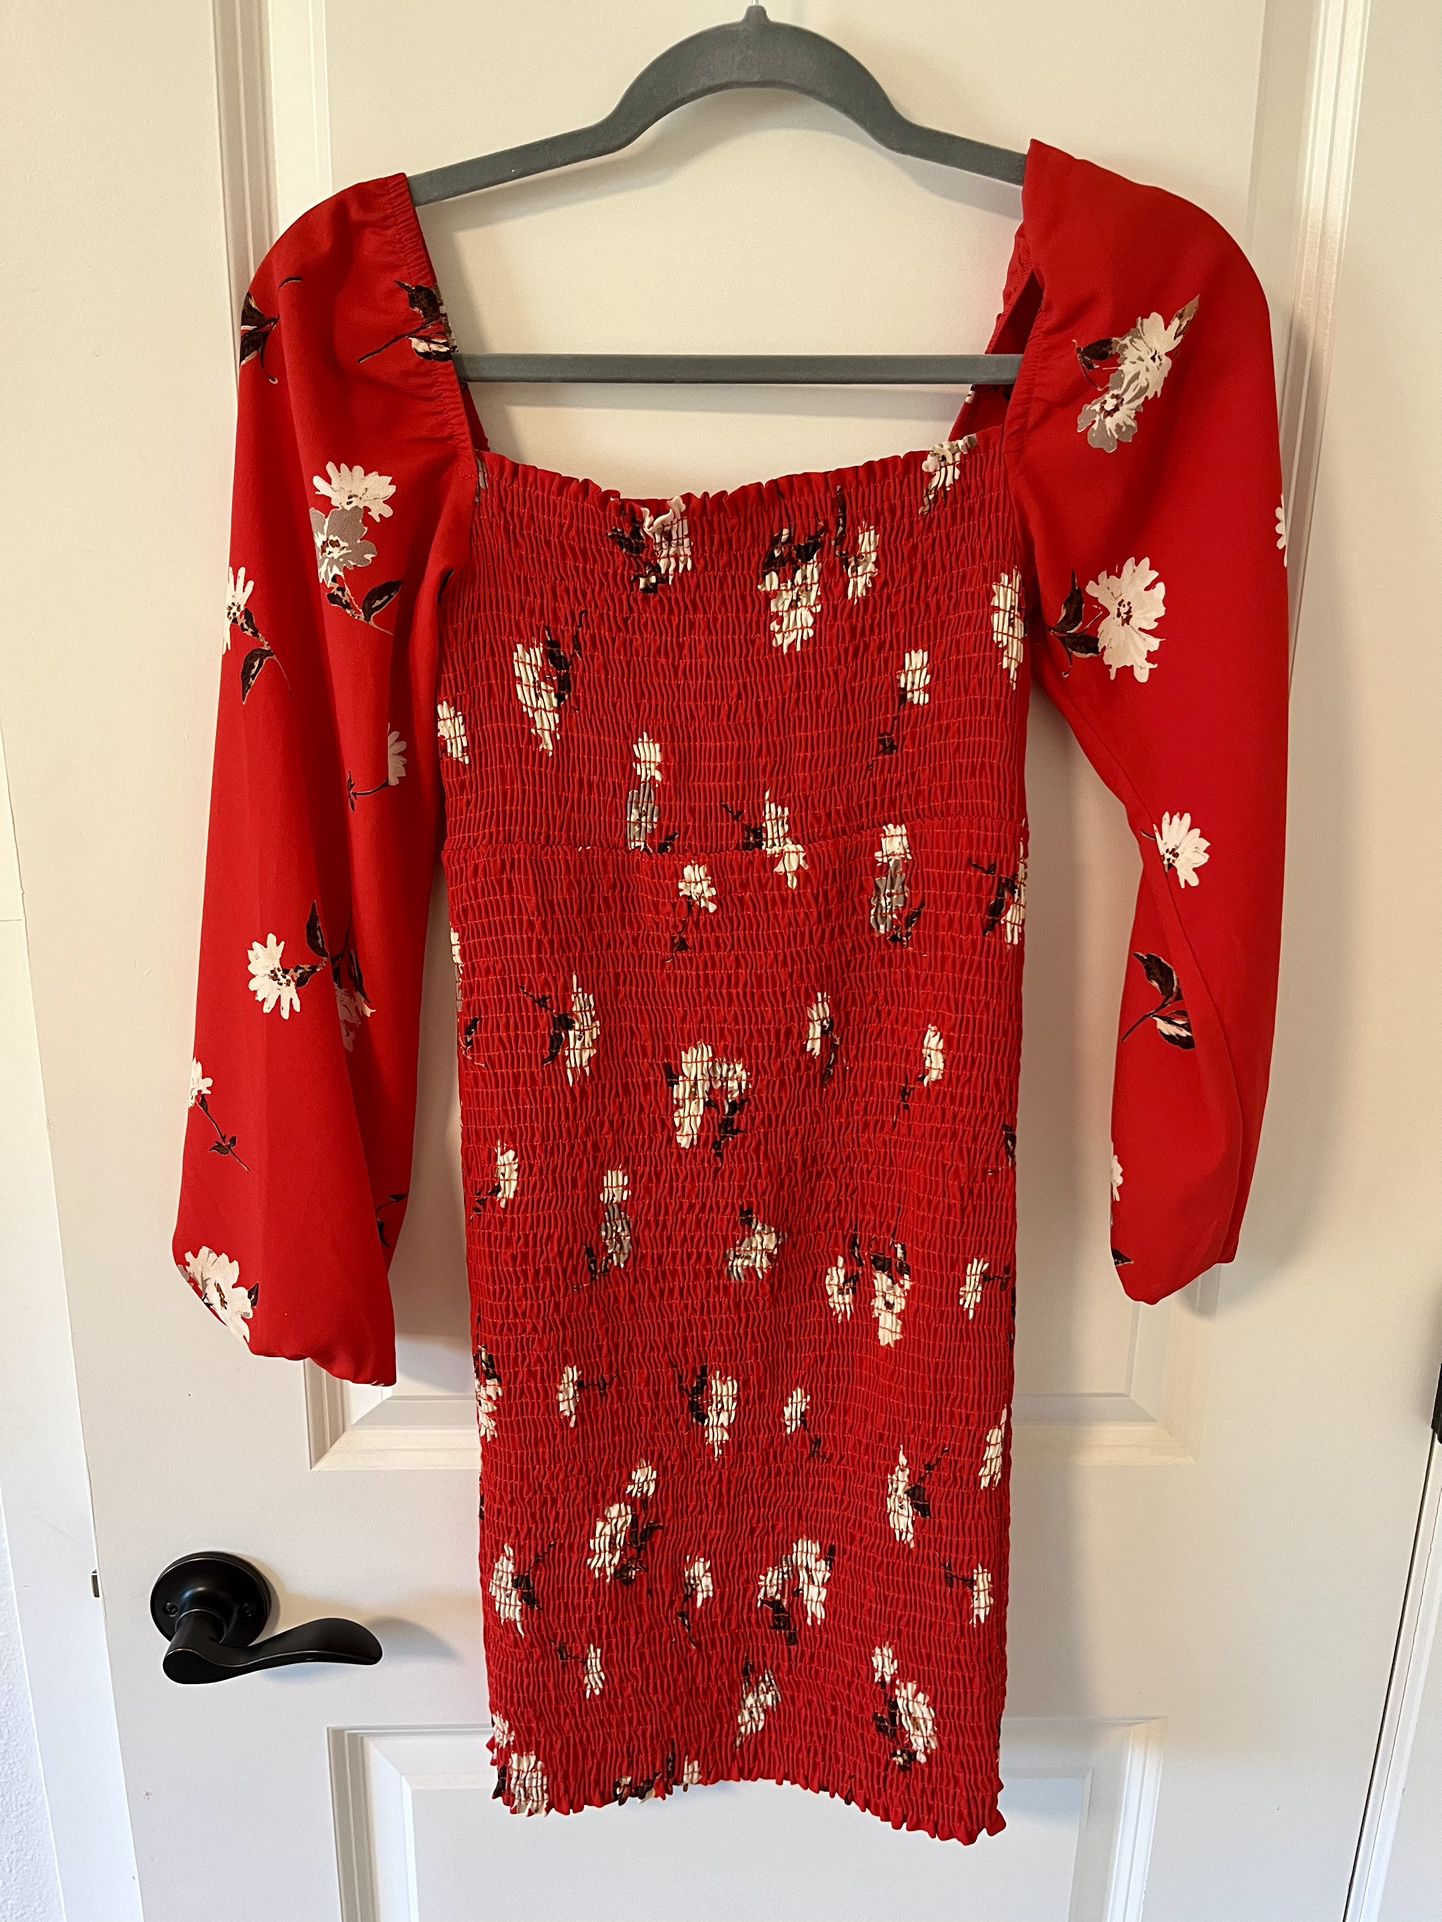 Veronica M Red Floral Dress Size Small